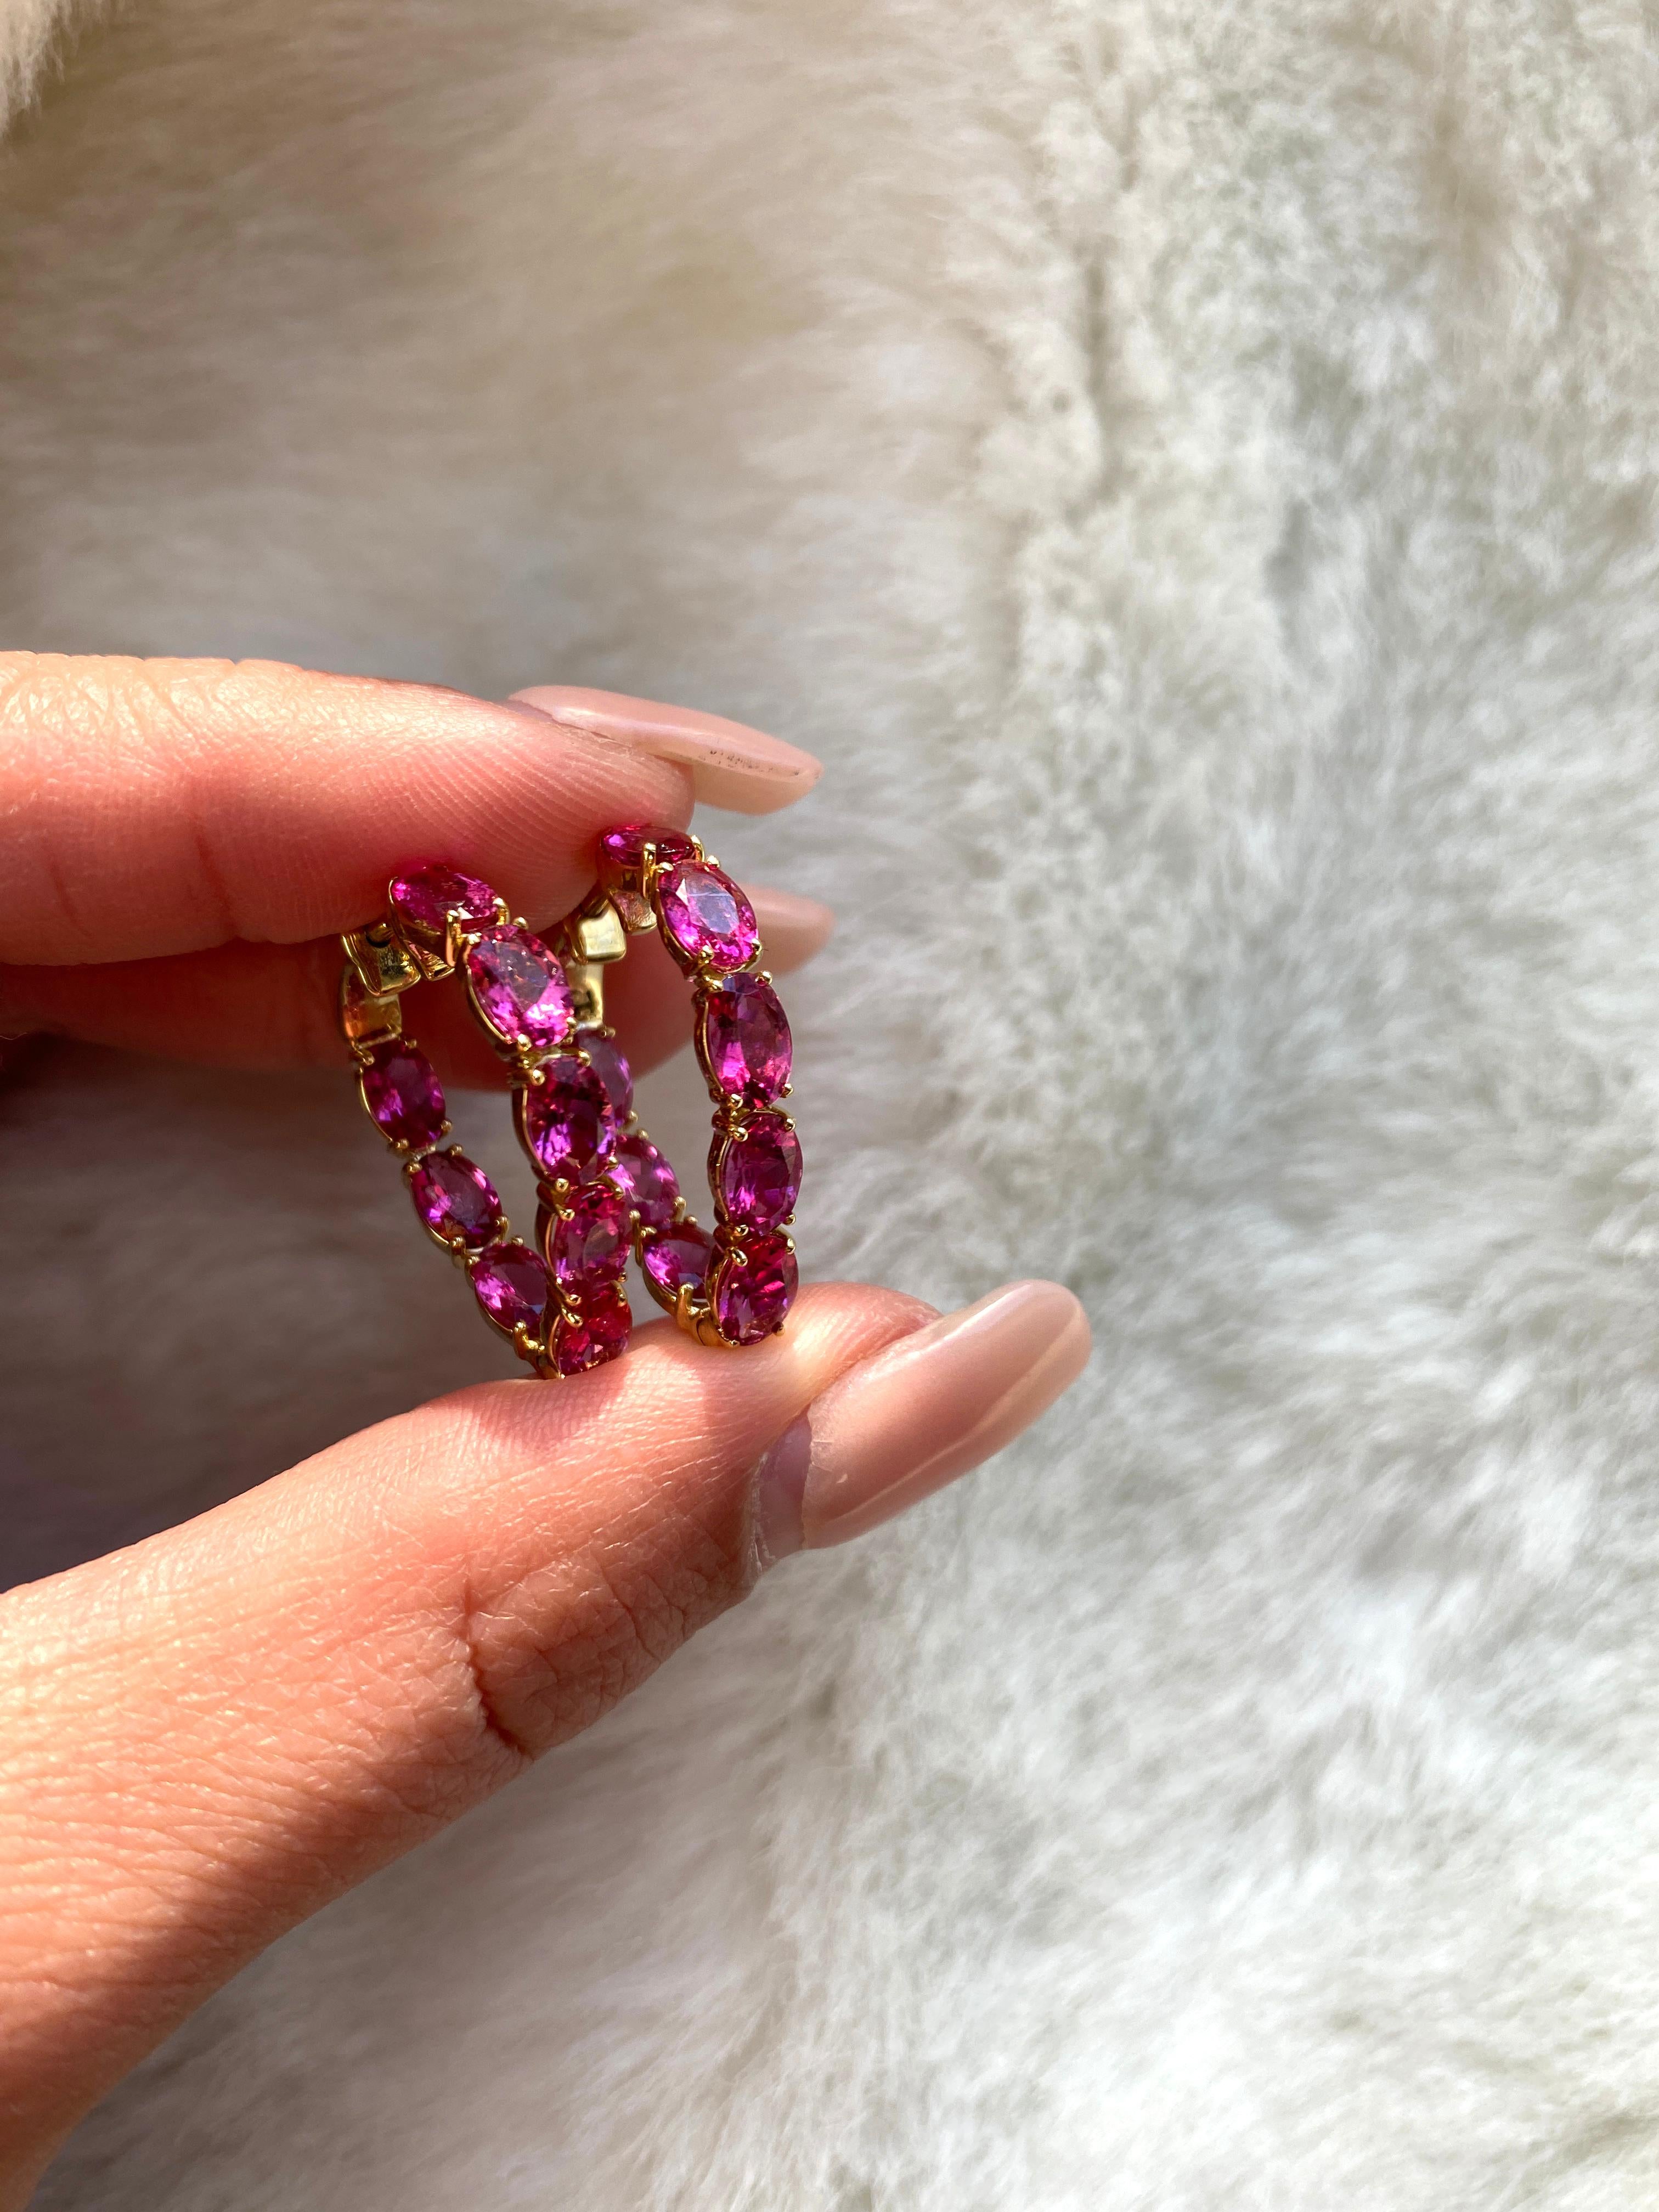 Stunning Heart Shape Rubelite Hoop Earrings in 18K Yellow Gold, from 'G-One' Collection. These earrings are the perfect gift for a special occasion. Unique in its class. They will make you dazzle even more.

* Gemstone size:  6 x 4 mm
* Gemstone: